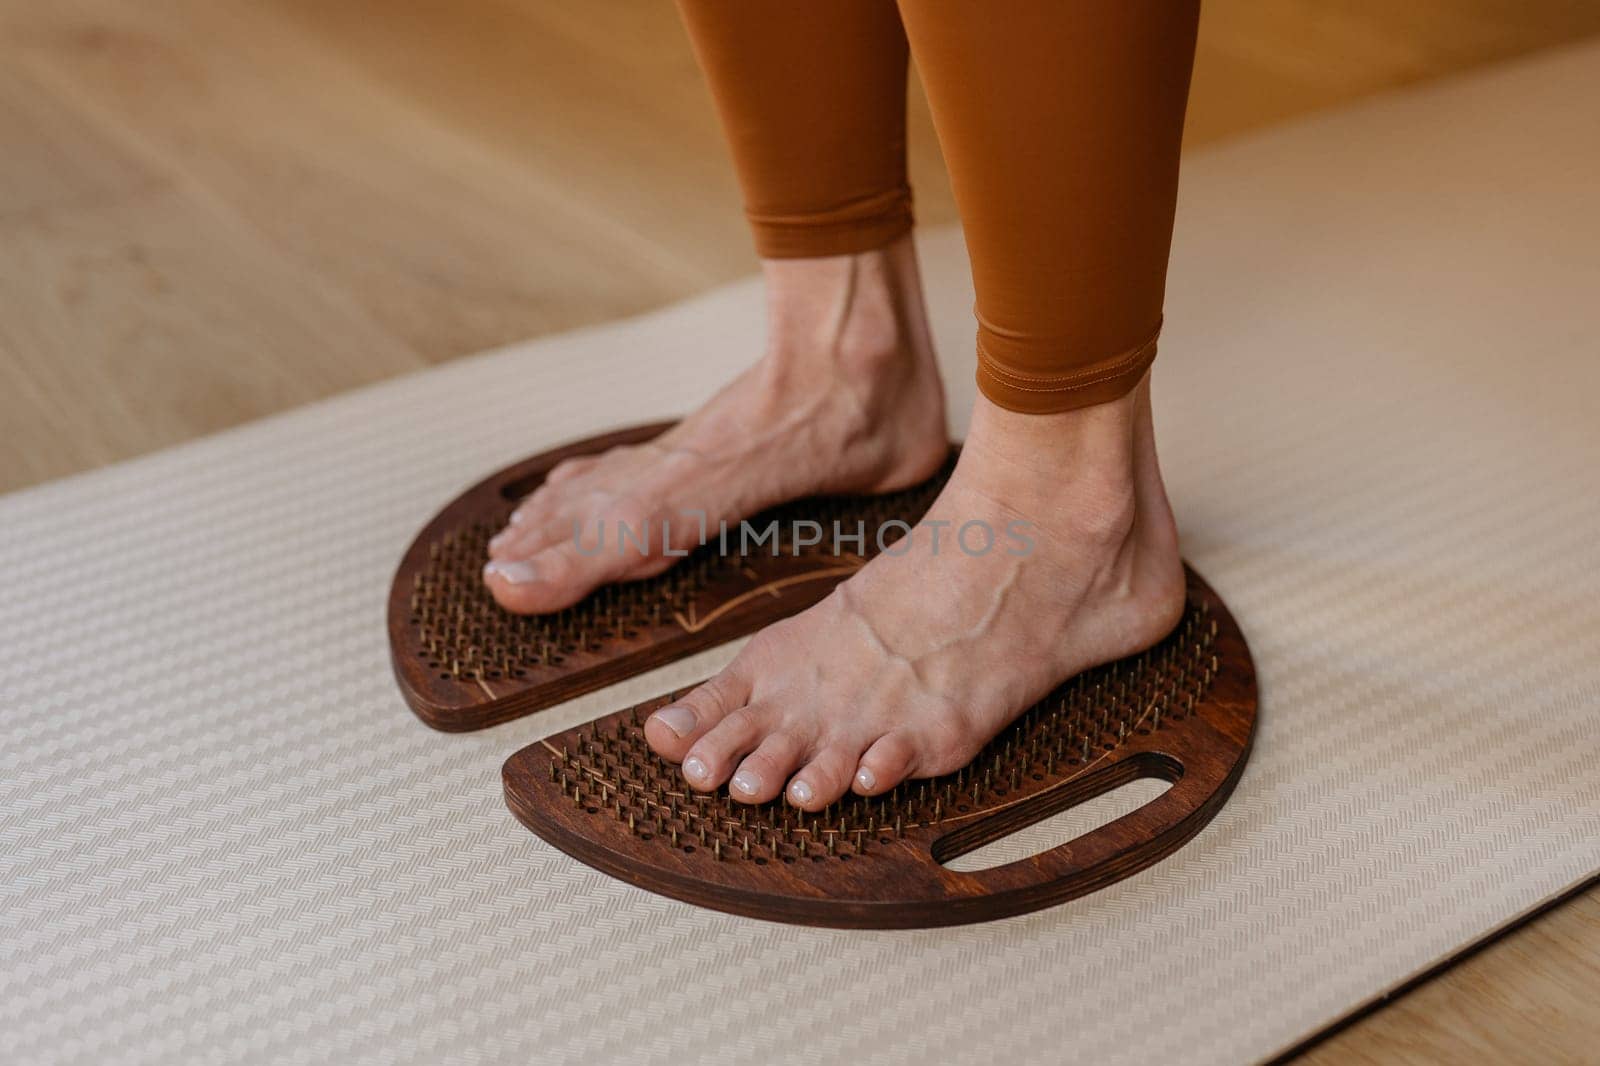 Acupressure in action with feet firmly placed on wooden sadhu boards by apavlin